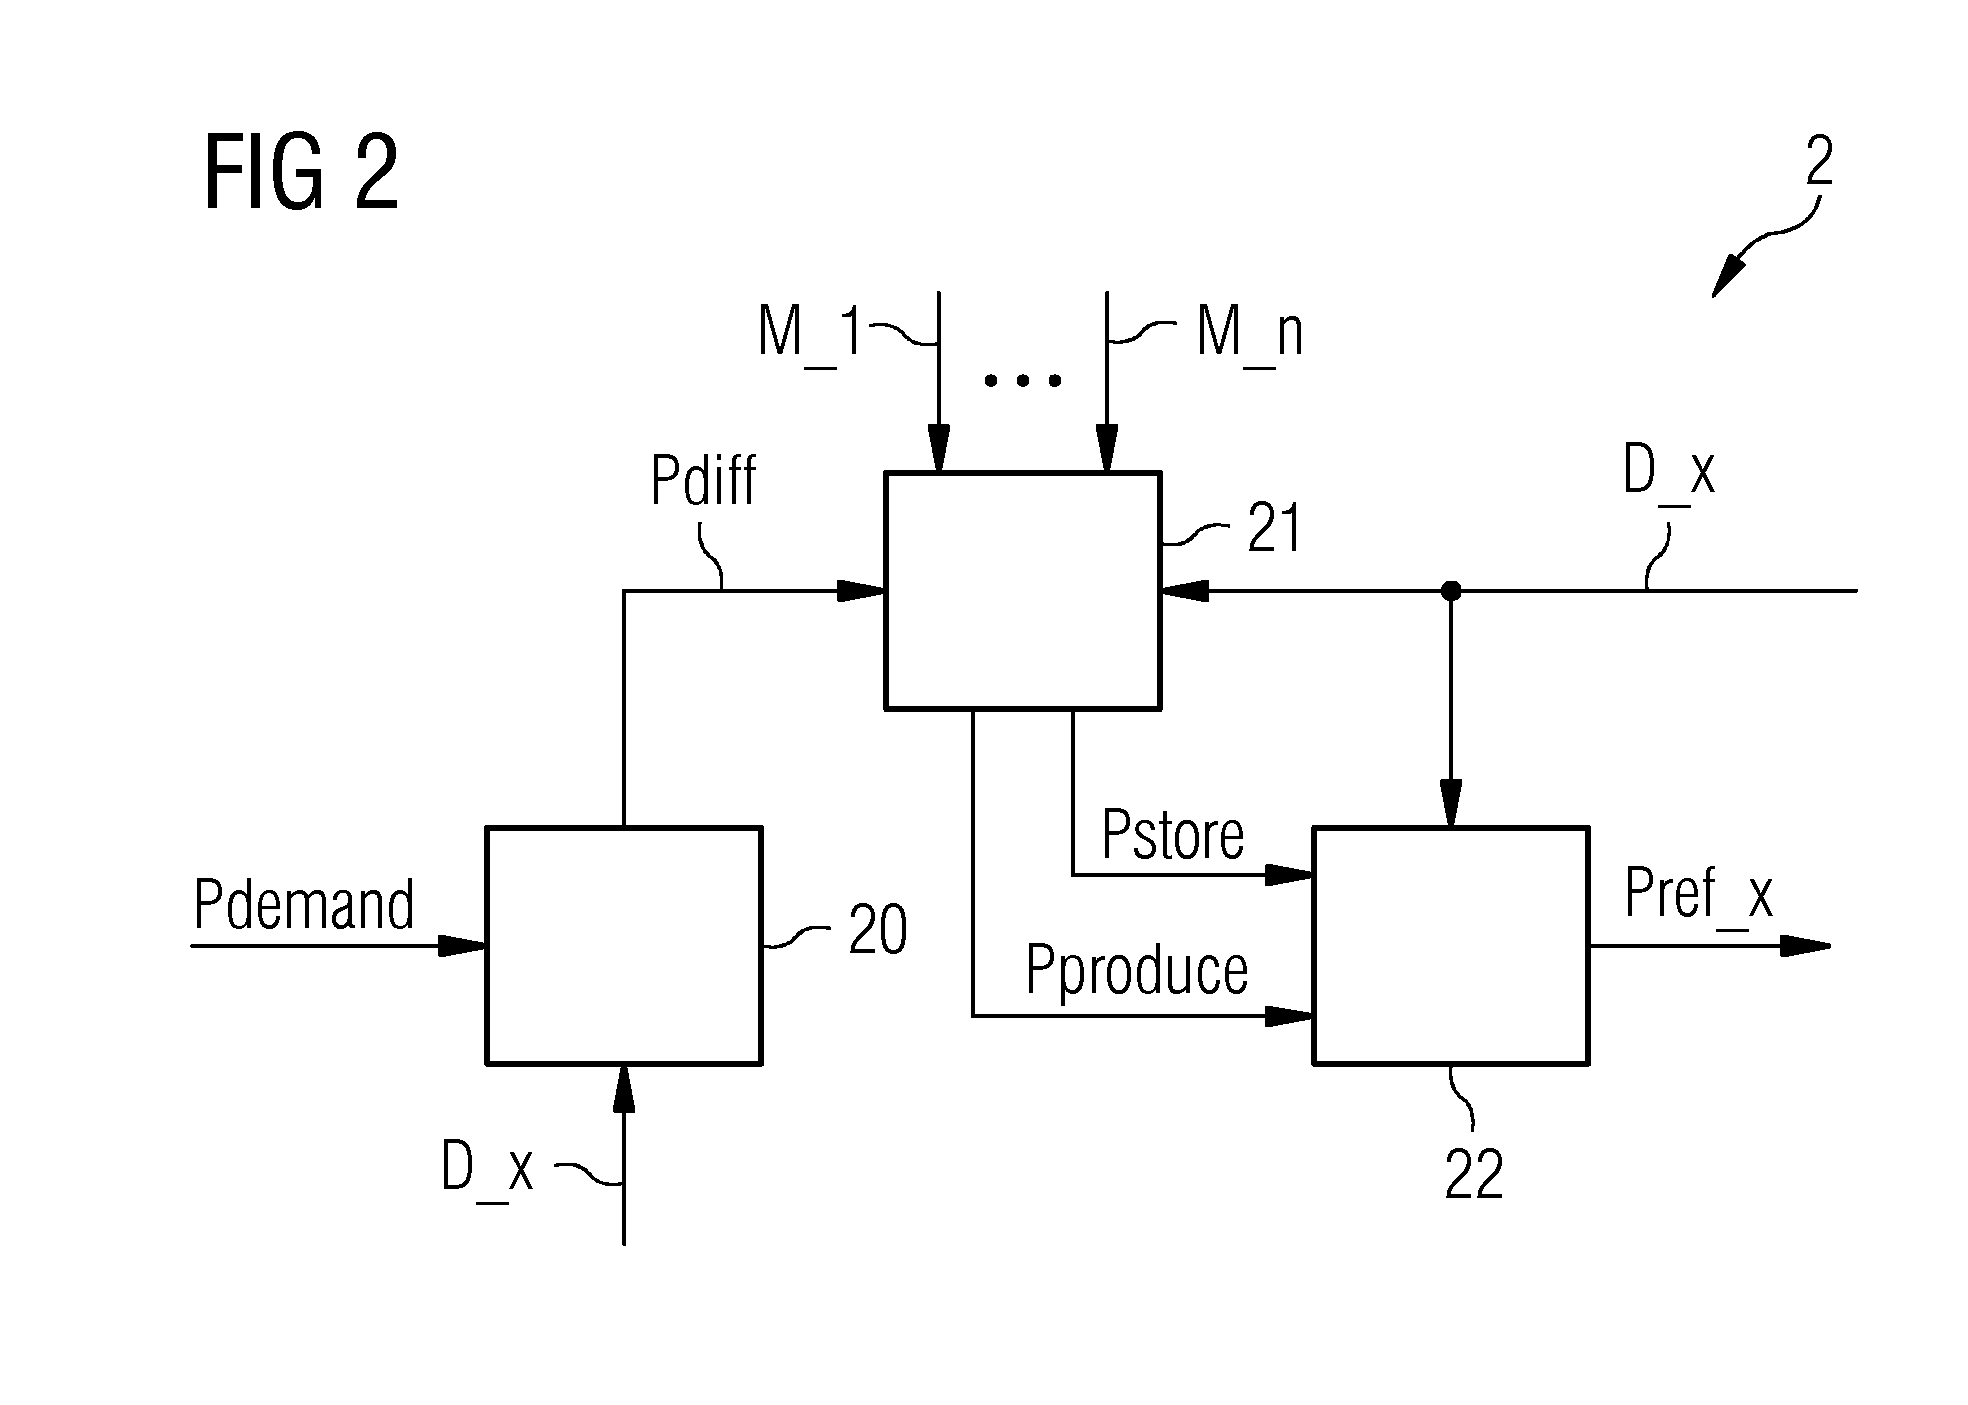 Method of controlling a power network